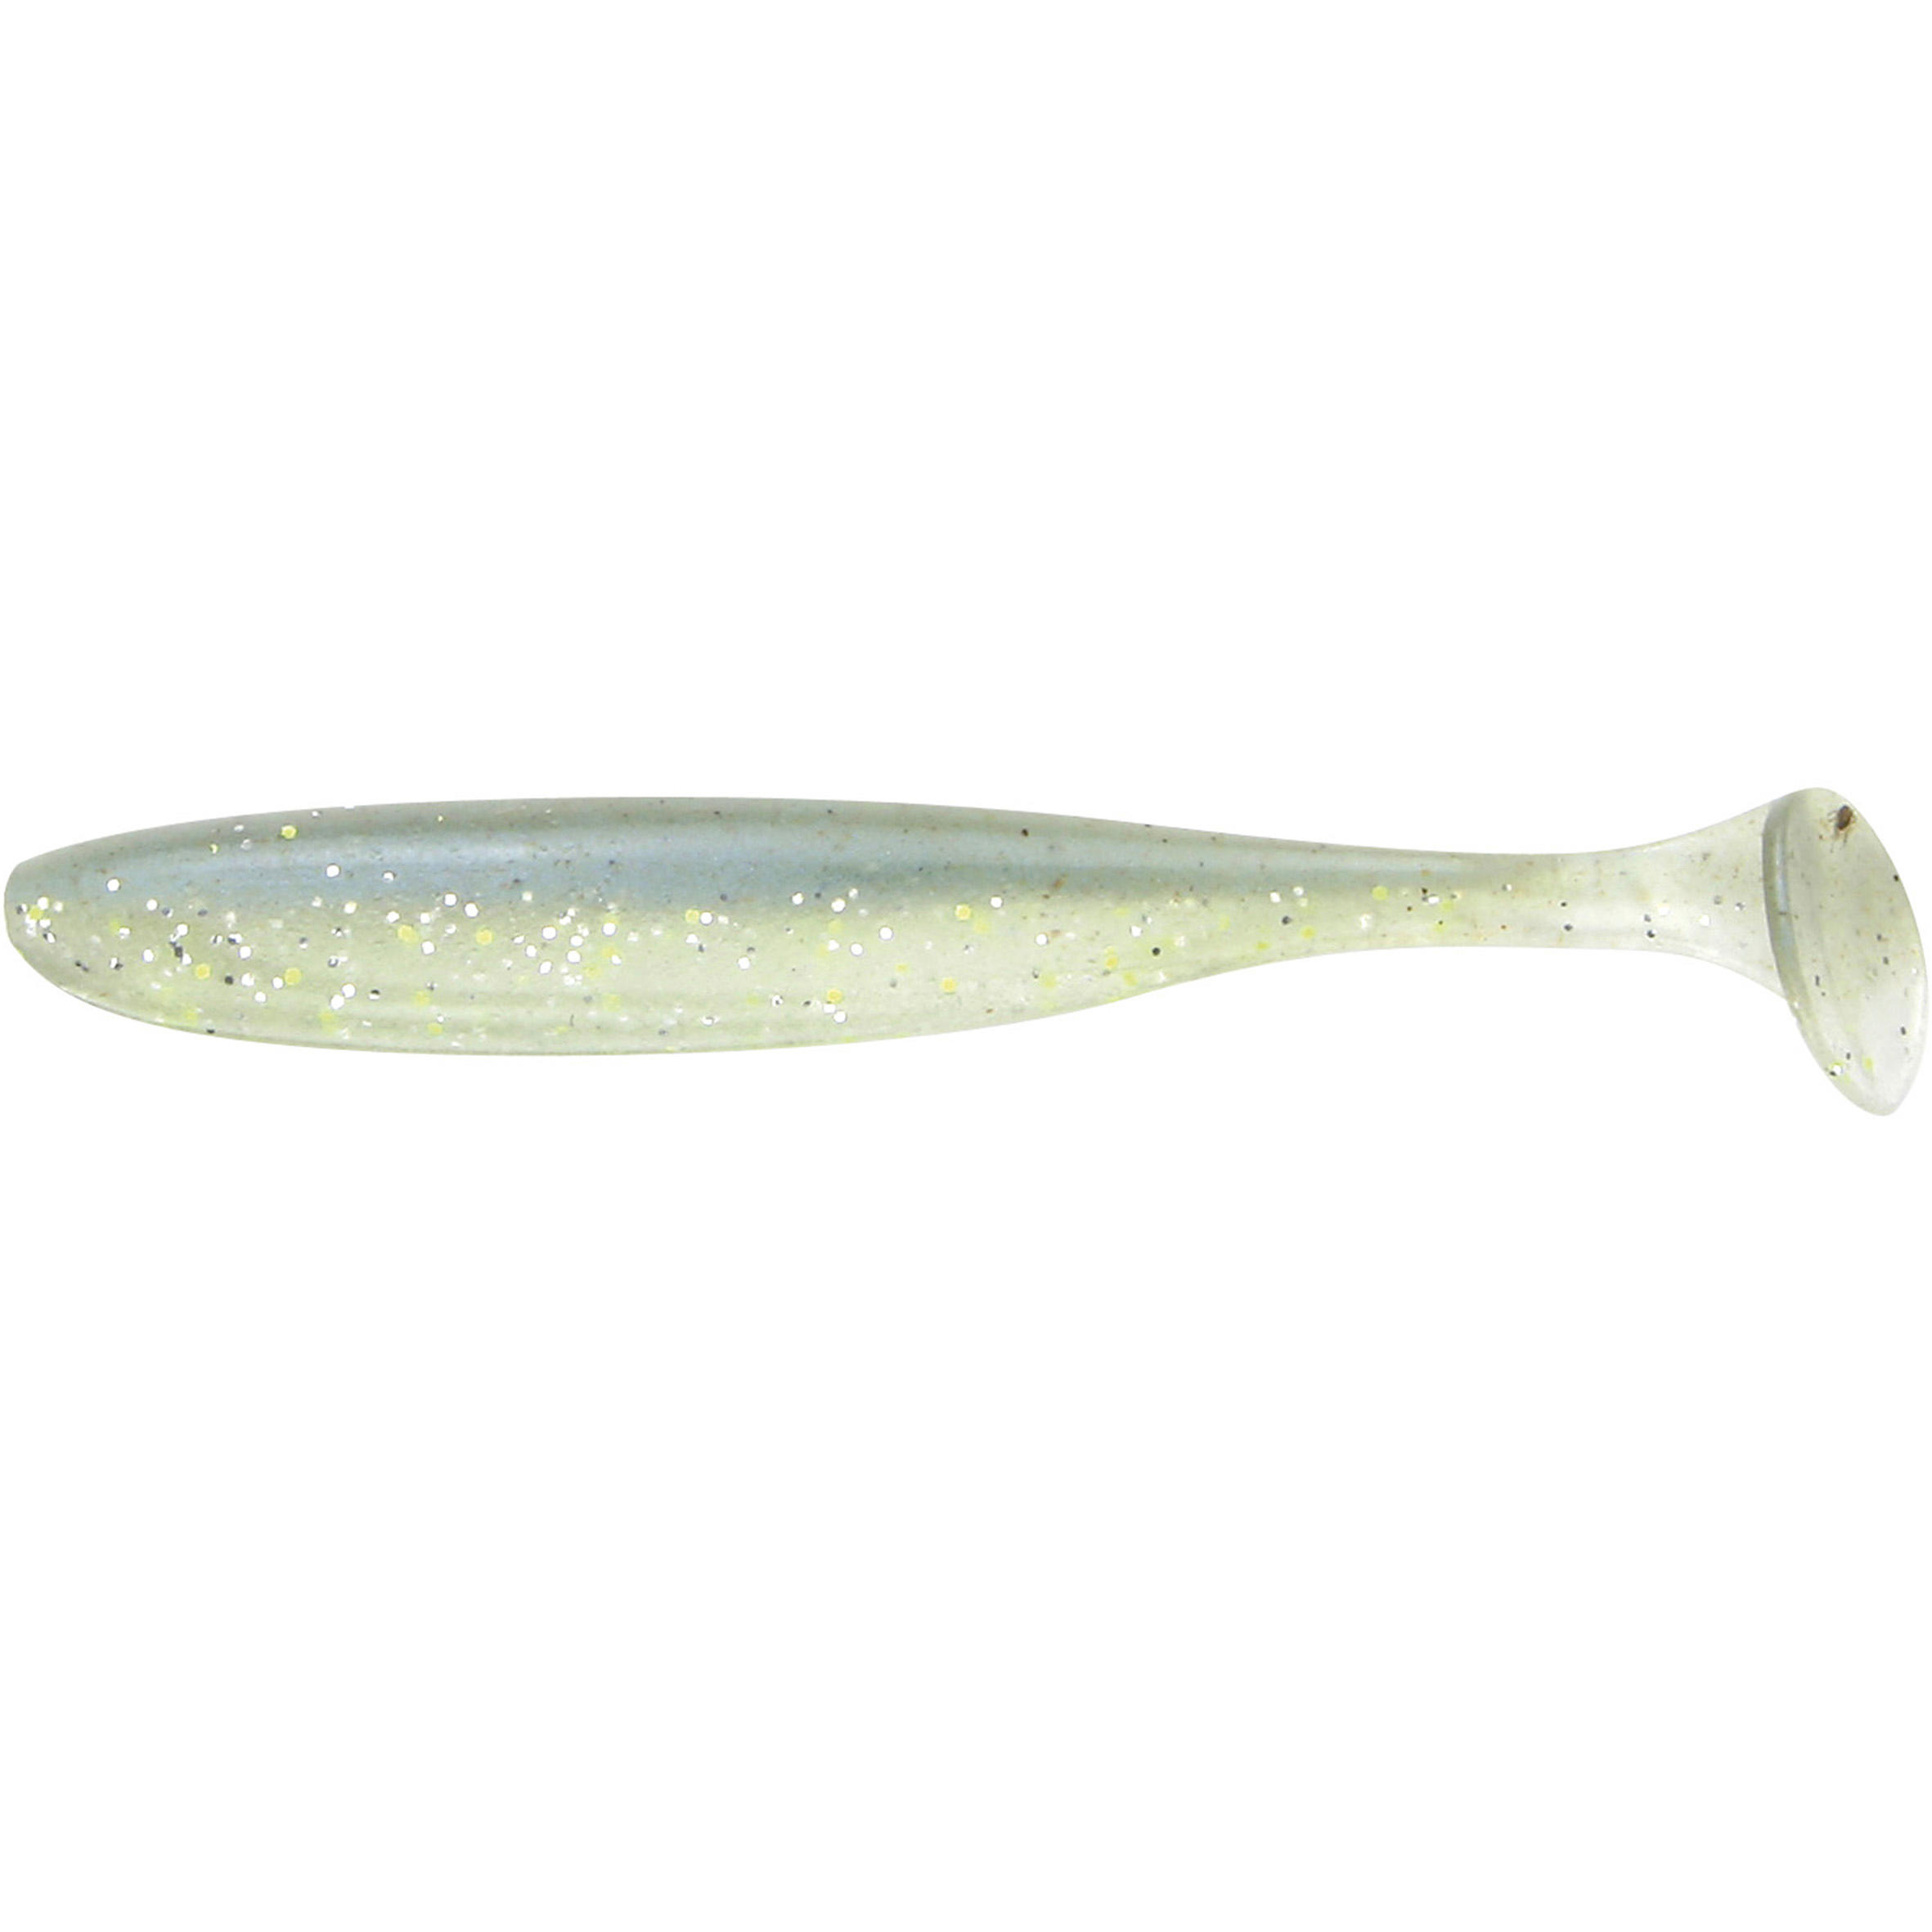 KEITECH LURE FISHING SUPPLE LURE EASY SHINER 5 SEXY SHAD